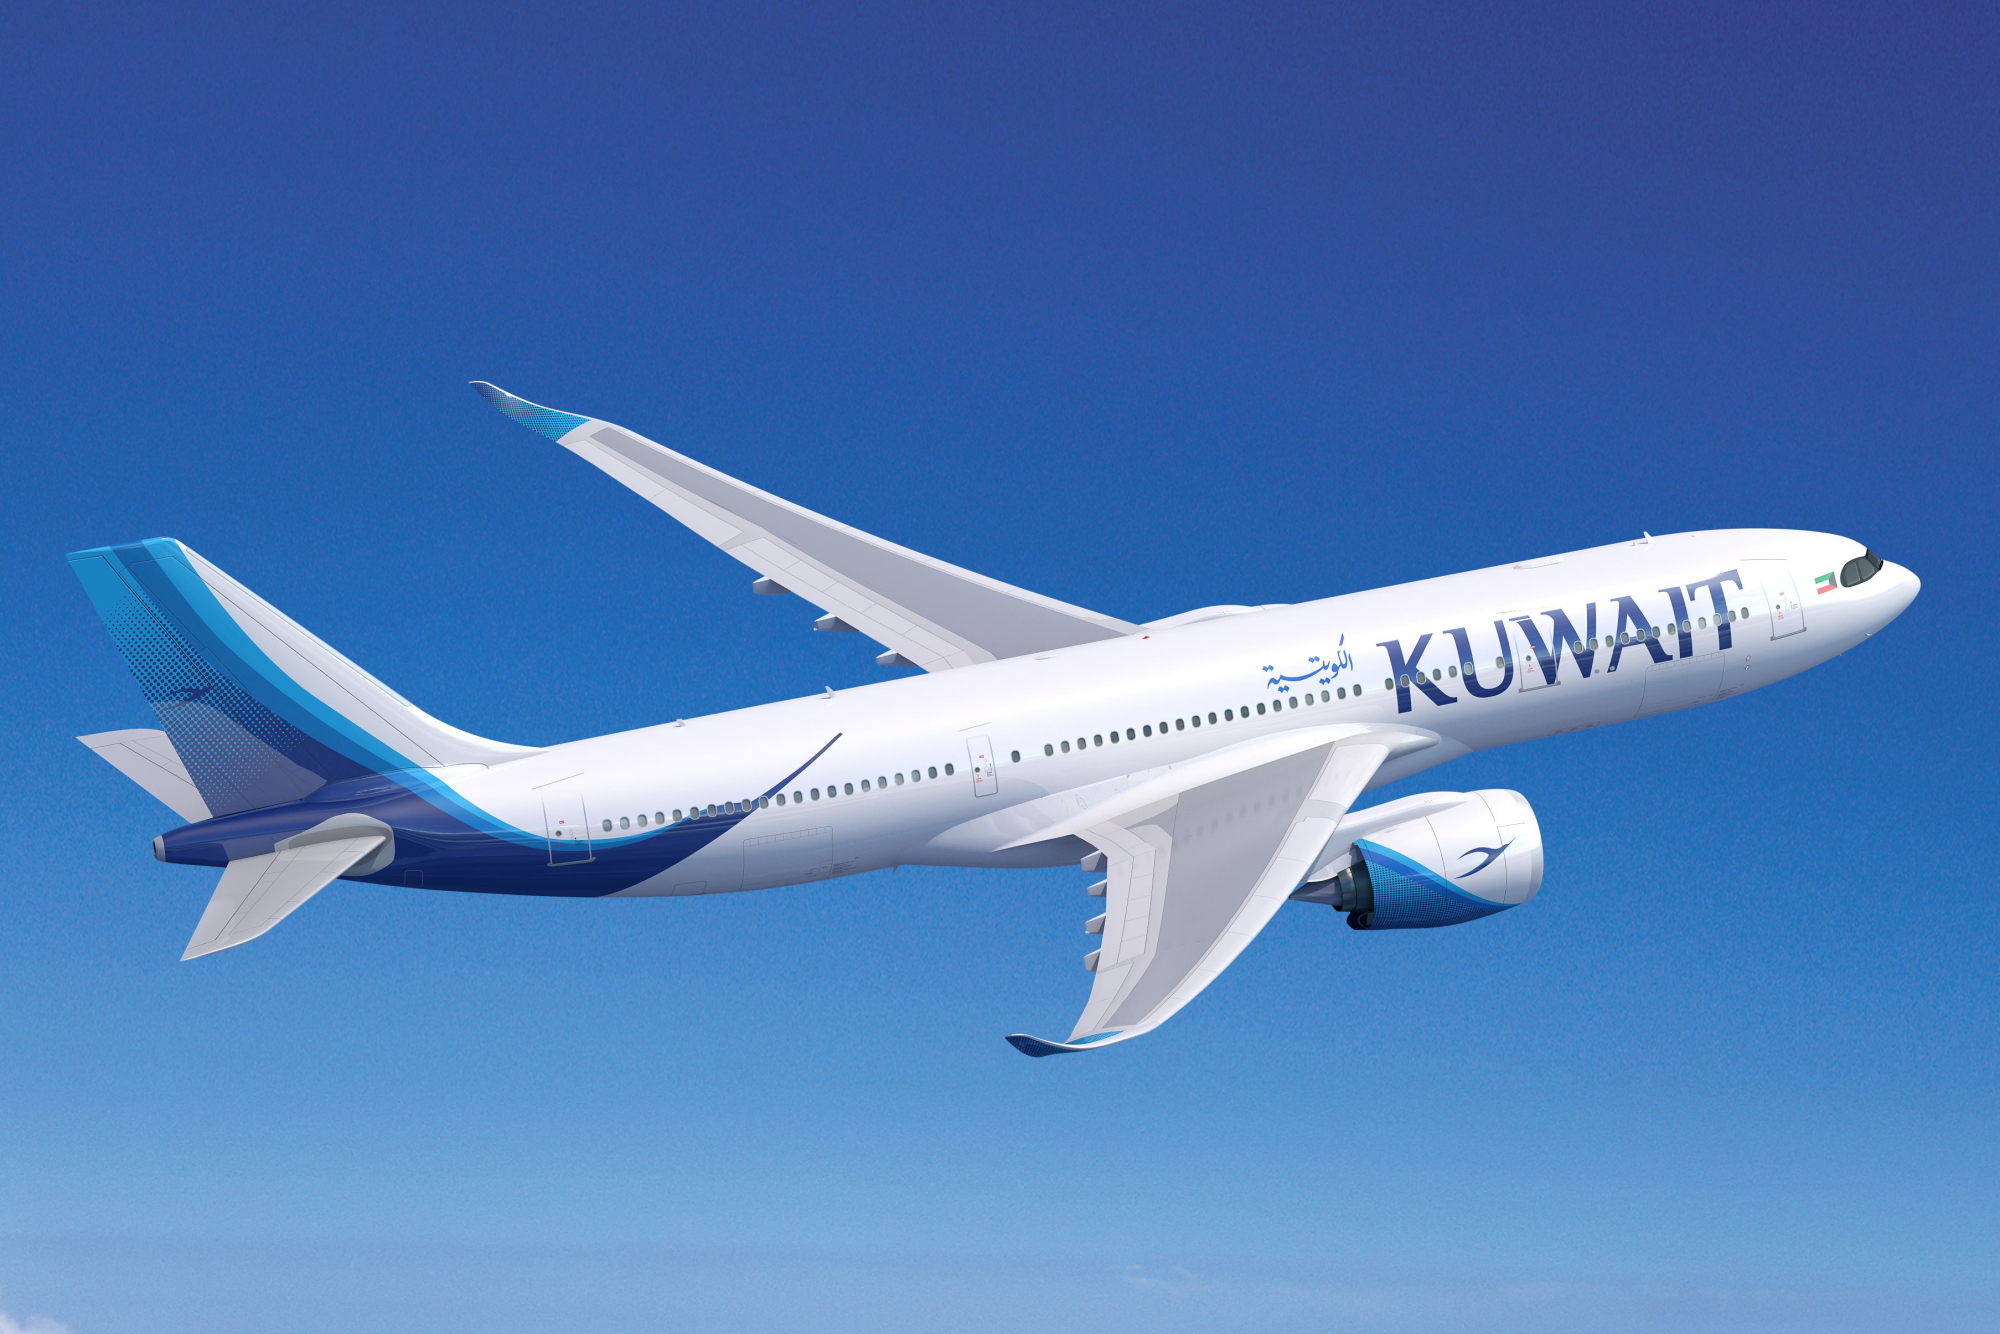 Kuwait Airways has signed a Purchase Agreement (PA) with Airbus for eight A330-800 aircraft. The deal marks an important addition in Kuwait Airways’ fleet renewal and expansion strategy, as the airline also has A350 XWB and A320neo Family aircraft on order. Delivery of the new Airbus fleet will start in 2019 Click to enlarge.